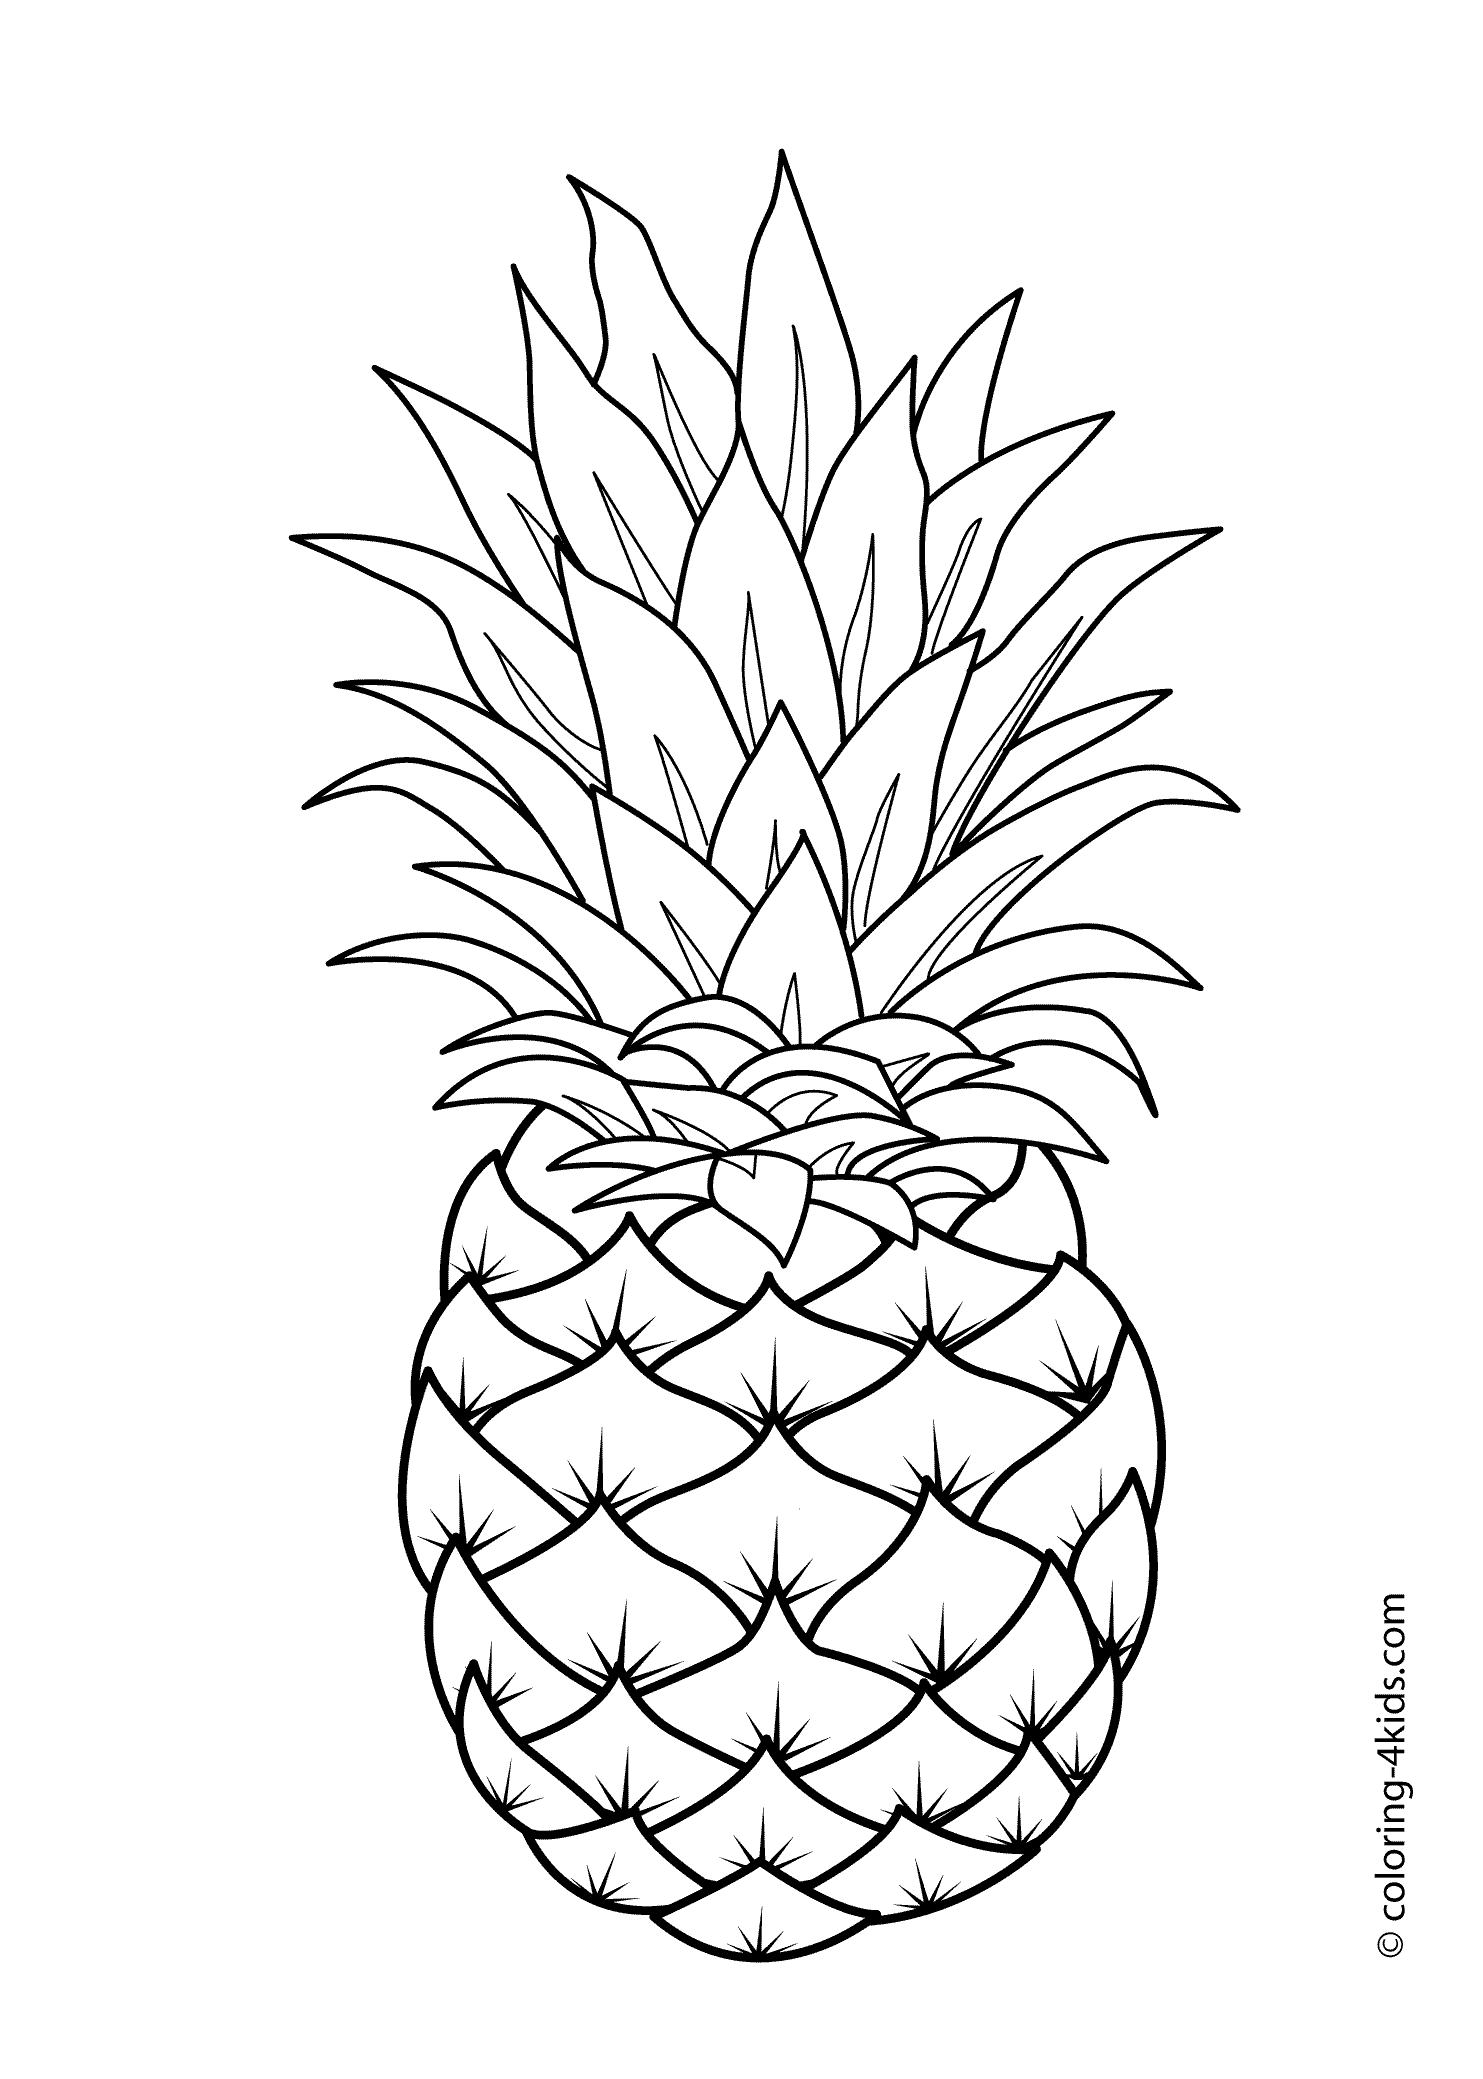 pineapple colouring picture free printable pineapple coloring pages for kids pineapple picture colouring 